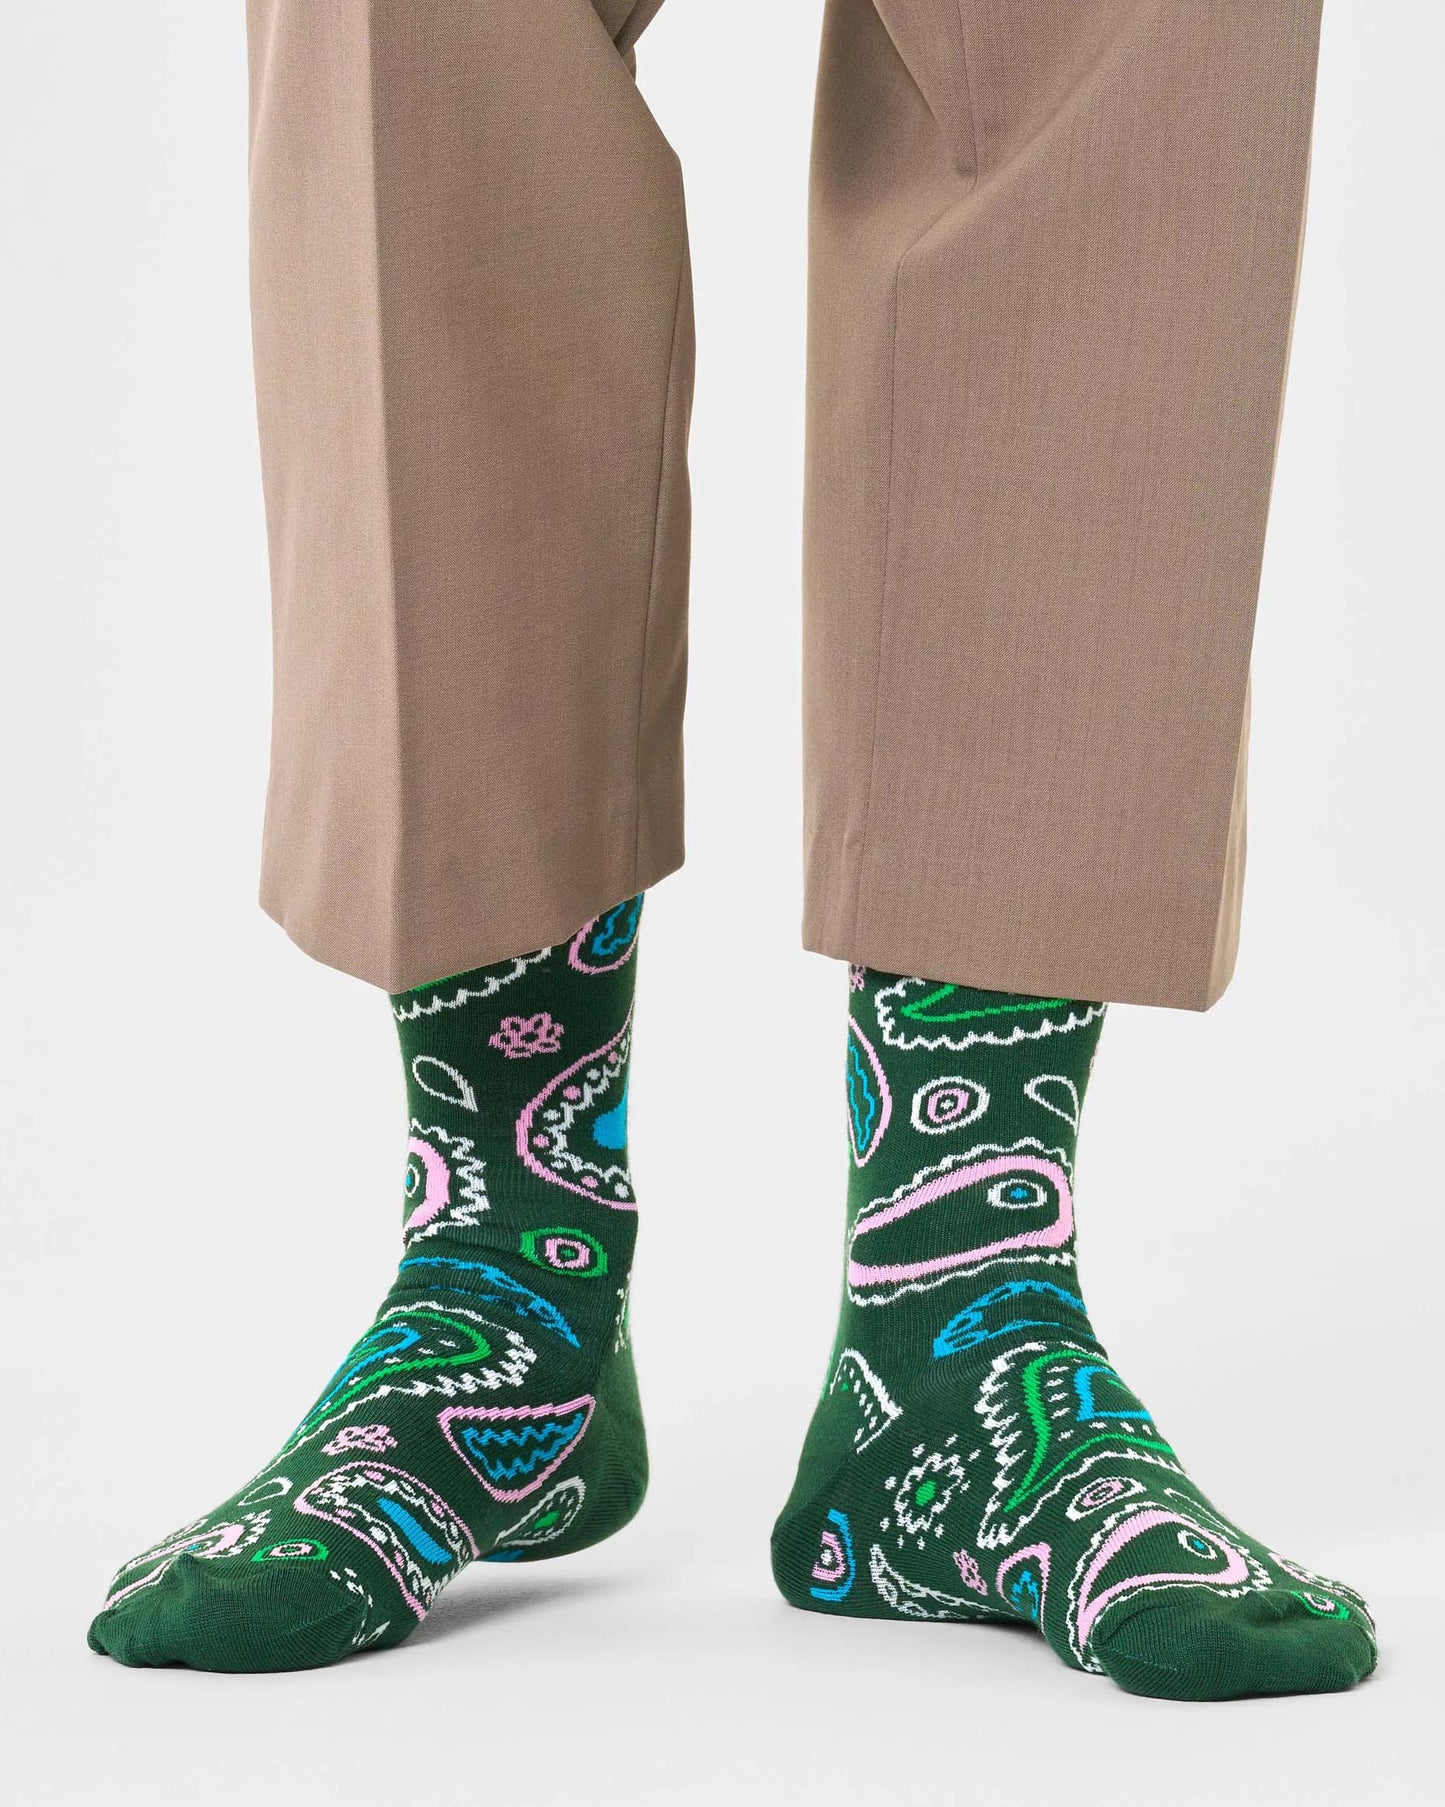 Happy Socks Paisley Sock - Khaki green cotton crew socks with a paisley style pattern in light shades of blue, pink, green and cream worn with cropped beige pants.